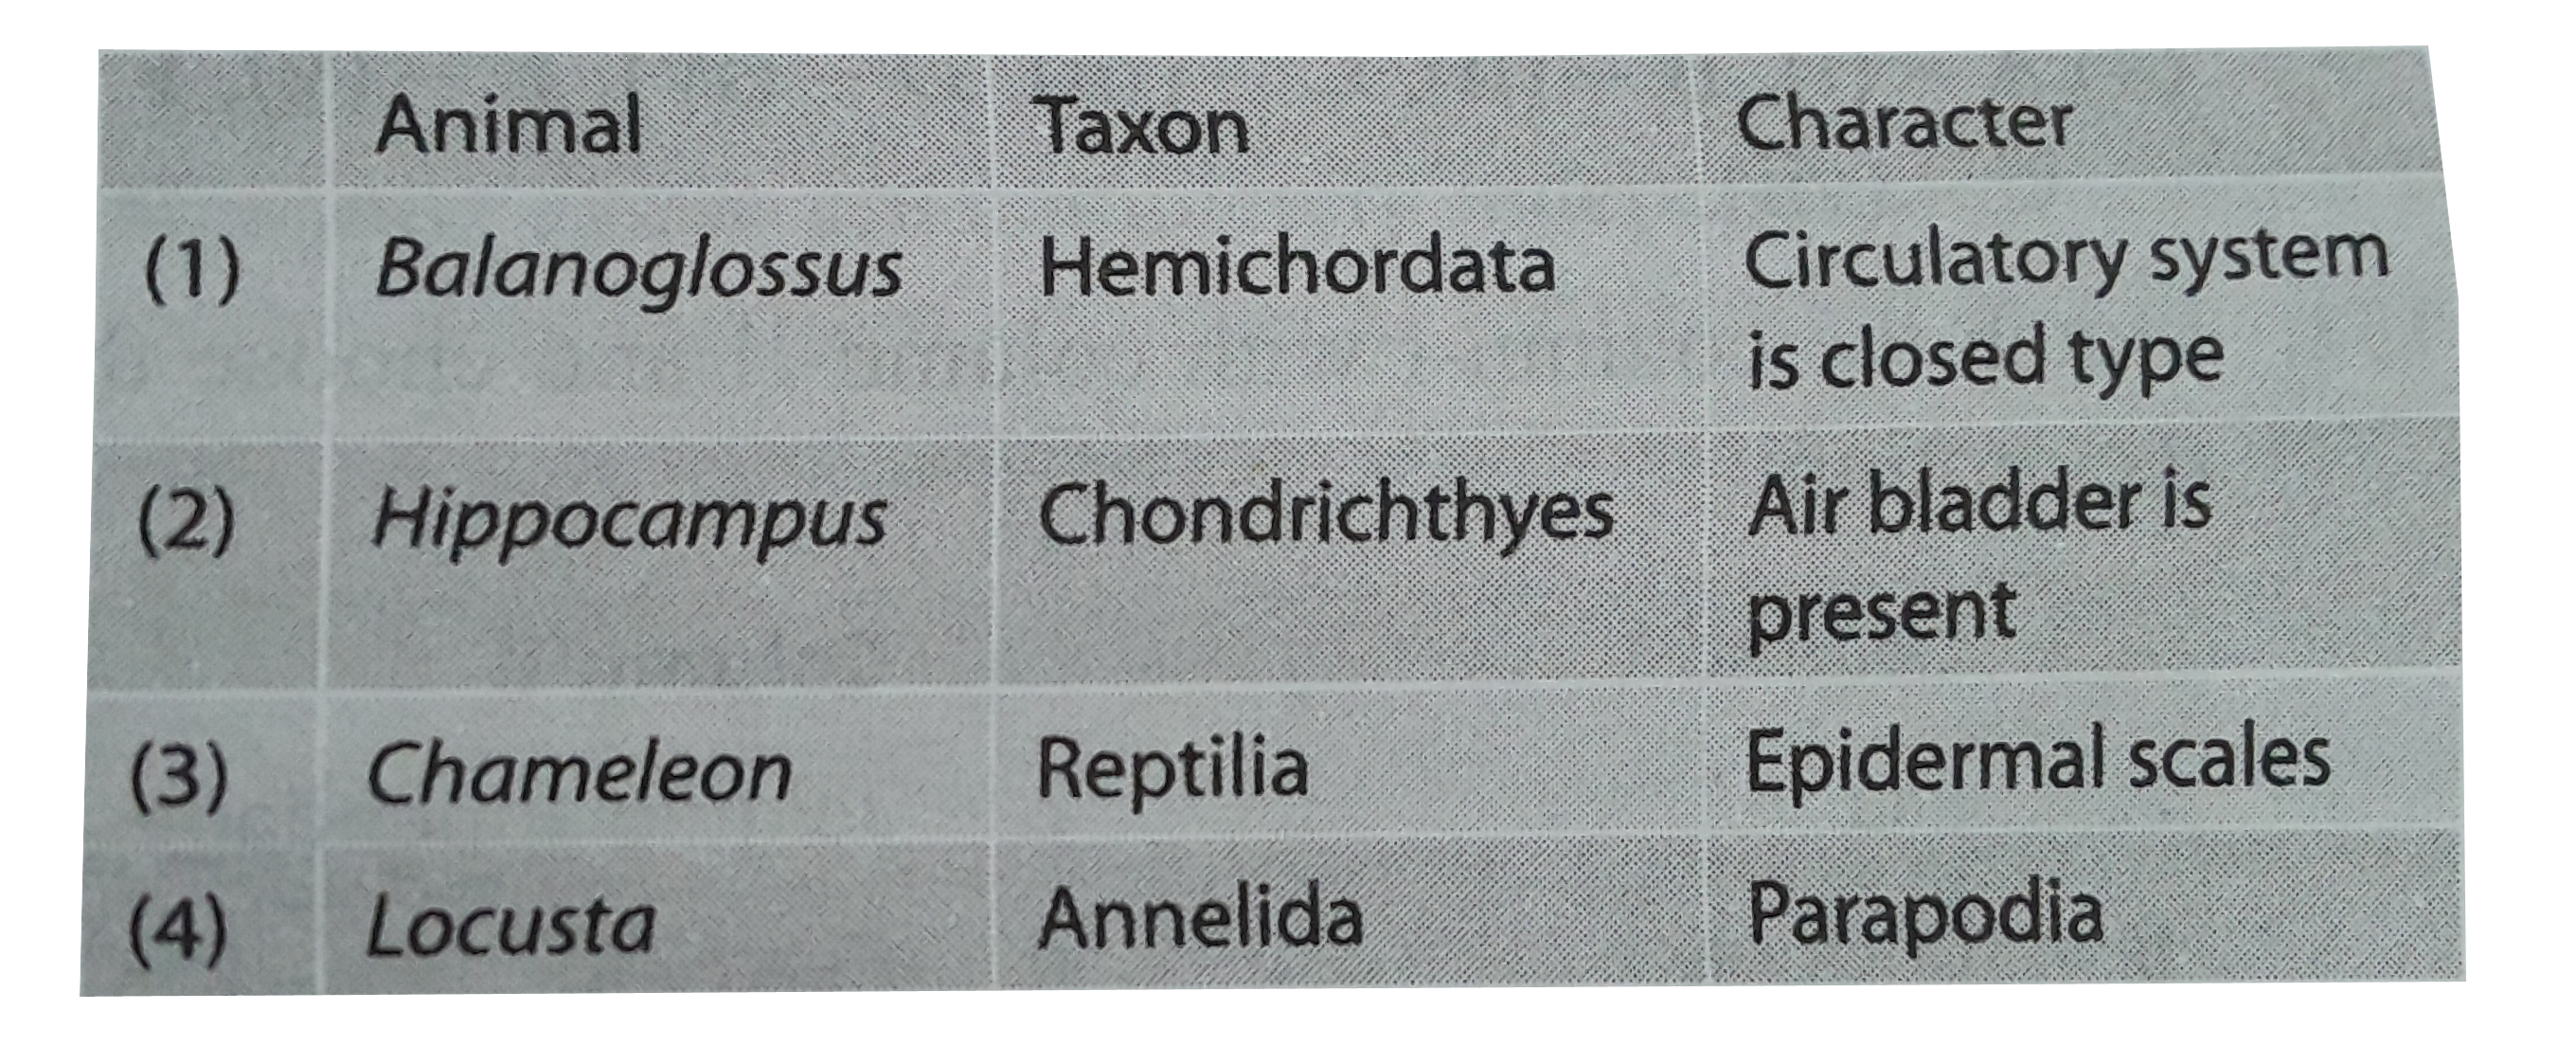 In the given table which animal is correctly matched with its taxon group and character .